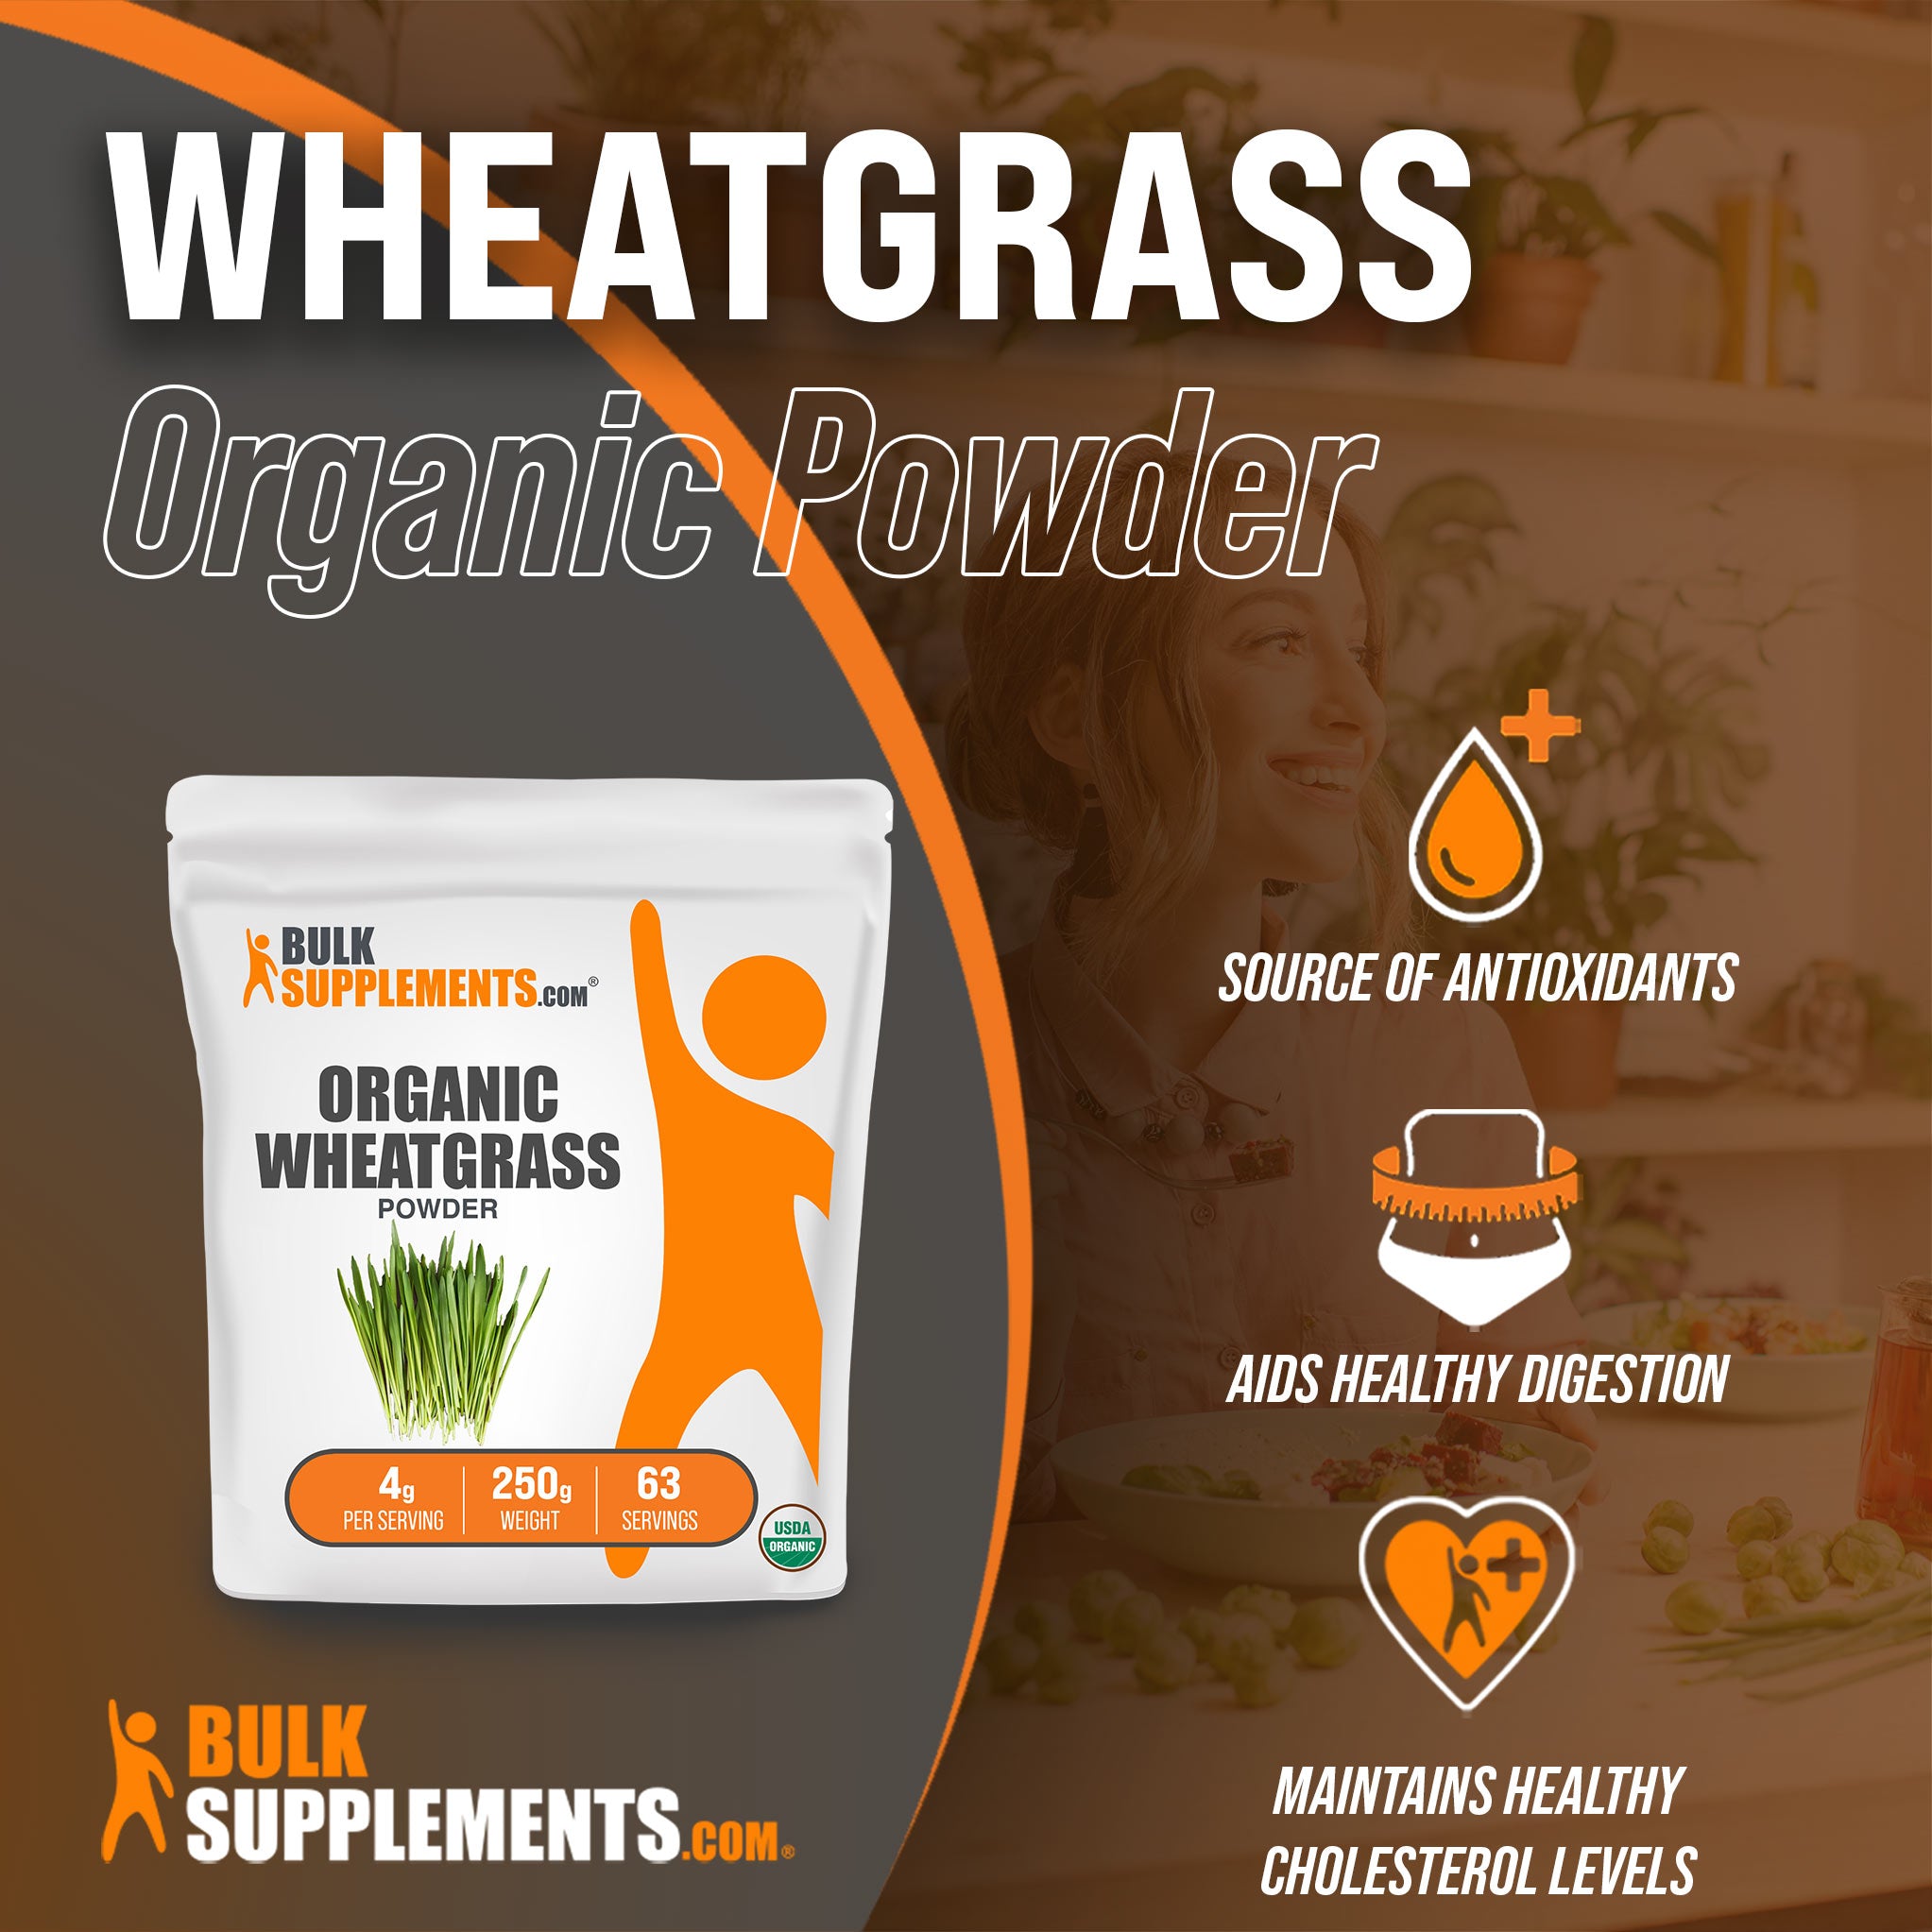 Benefits of Organic Wheatgrass Powder: source of antioxidants, aids healthy digestion, maintains healthy cholesterol levels